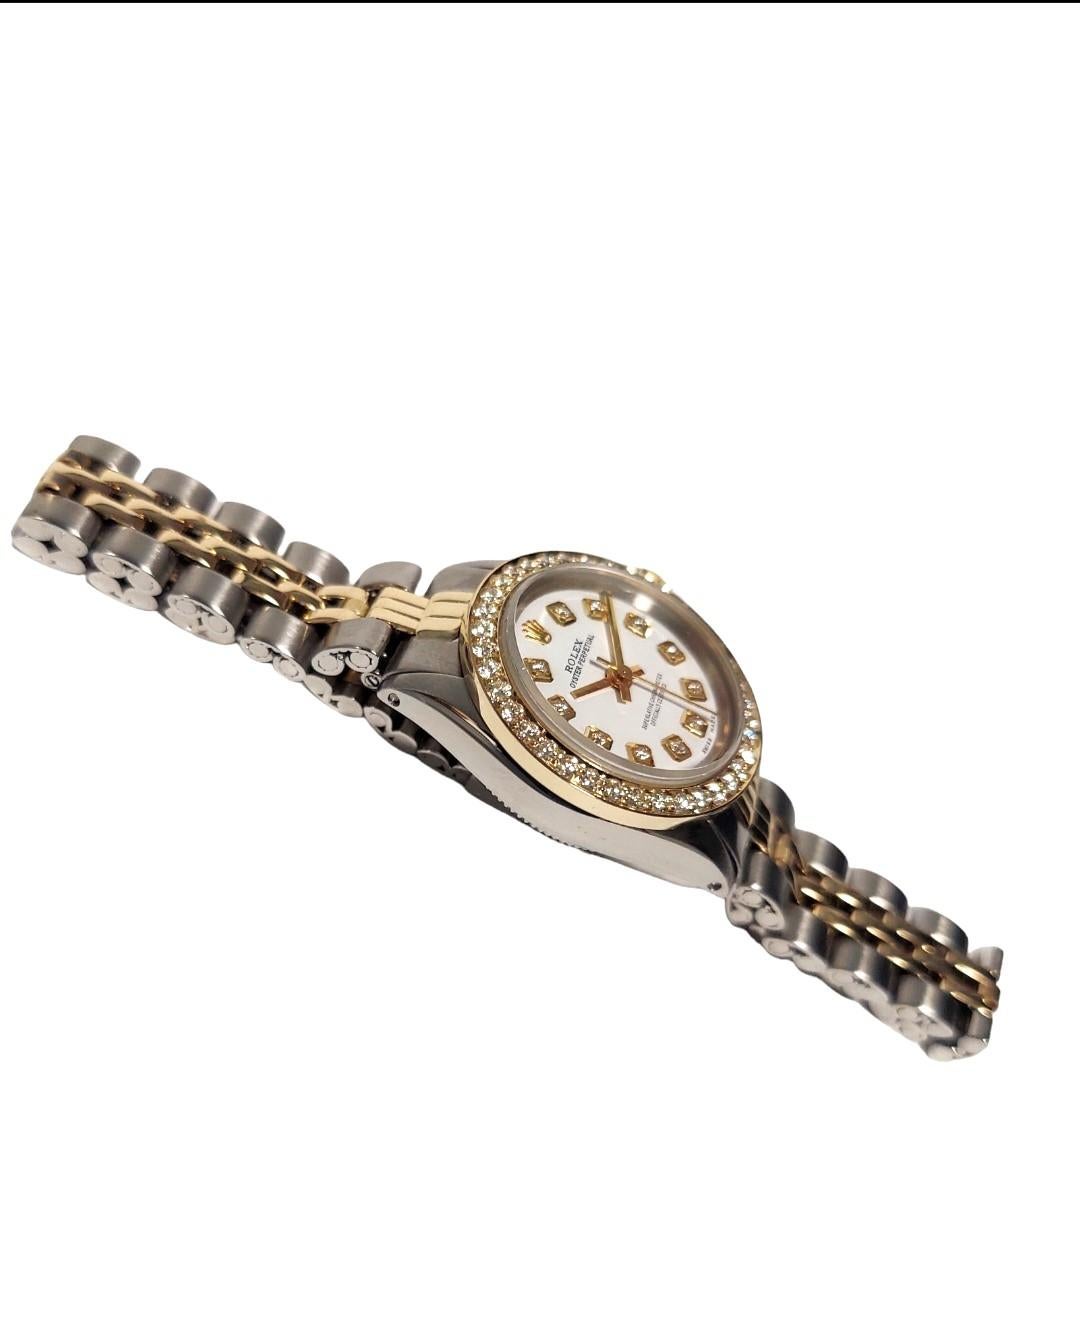 Brand - Rolex 
Style - oyster perpetual 
Gender- ladies 
Case size - 25mm
Model - 6619
Metals - stainless steel / Yellow Gold
Dial - custom White Diamond 
Bezel - Custom Yellow Gold Diamond 
Movement- Rolex automatic cal-1161 
Band - Twp-Tone folded